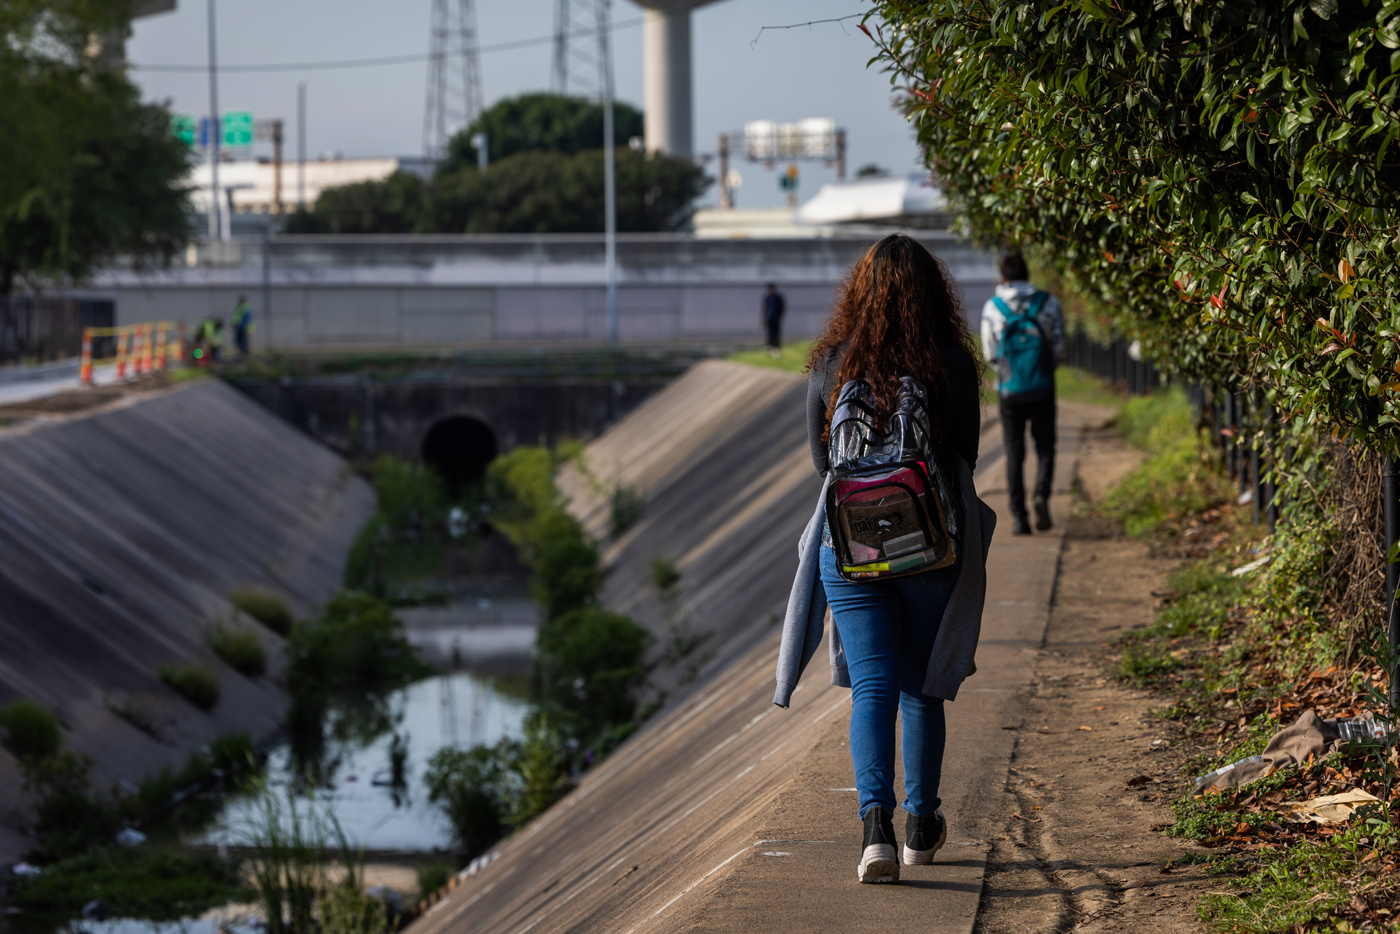 Students walk by a ditch wearing backpacks.